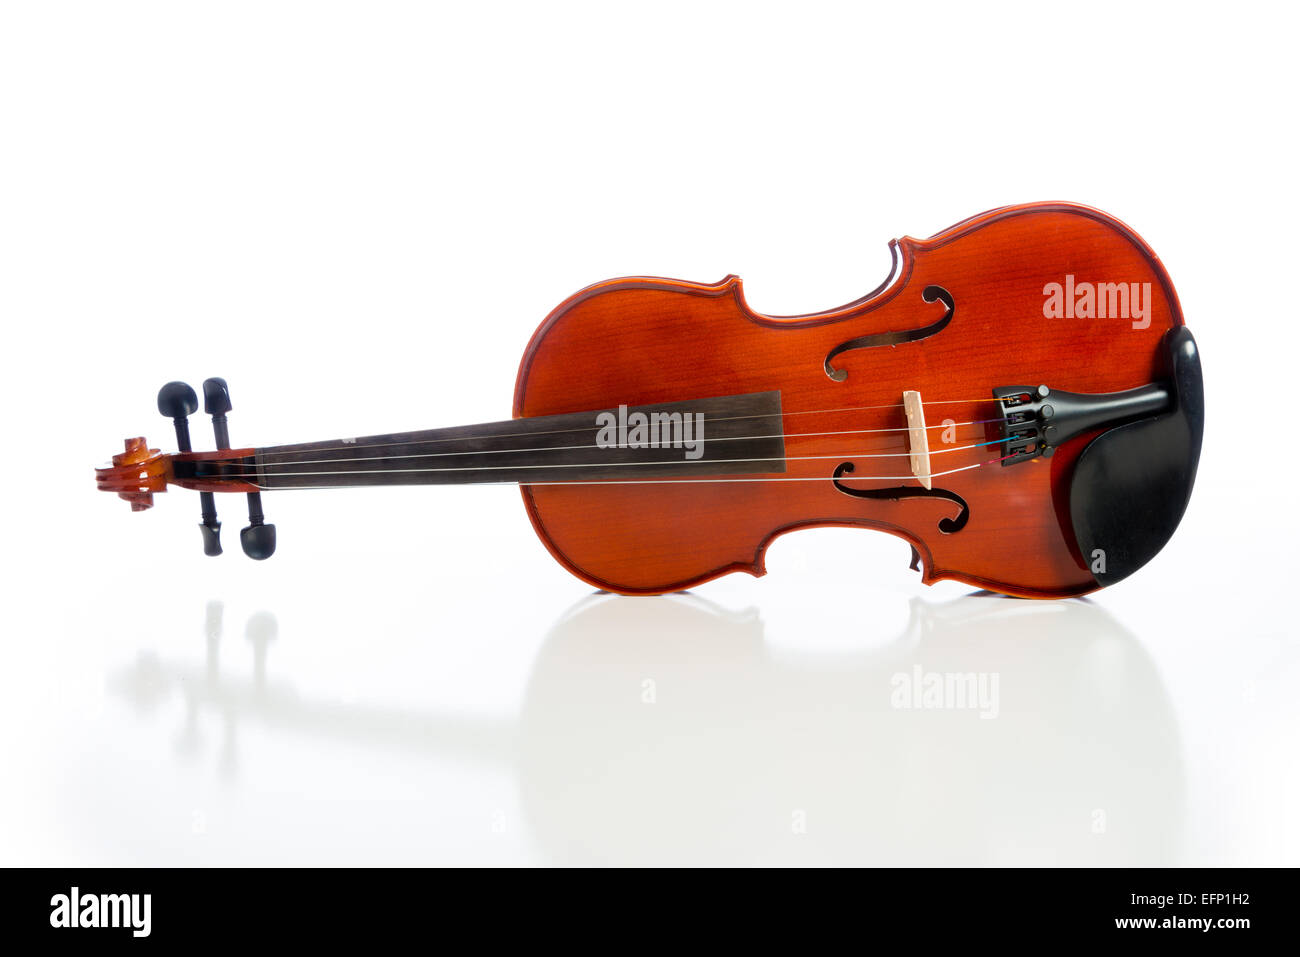 A violin on a white background Stock Photo